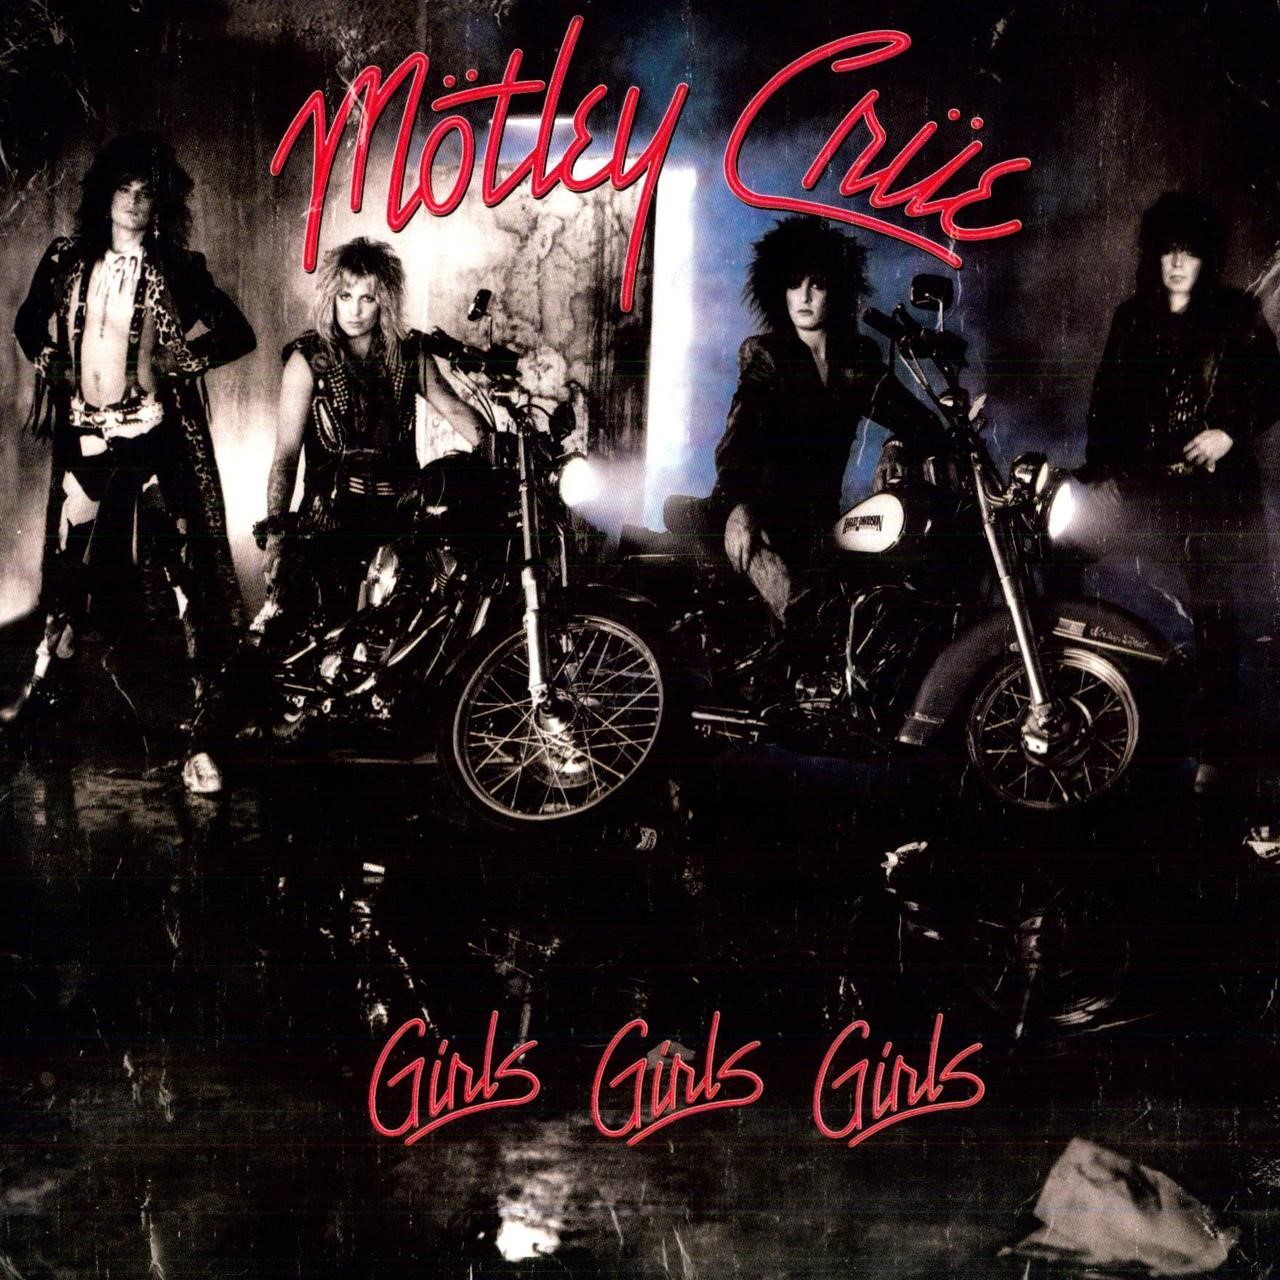 Art for Dancing on Glass by Mötley Crüe